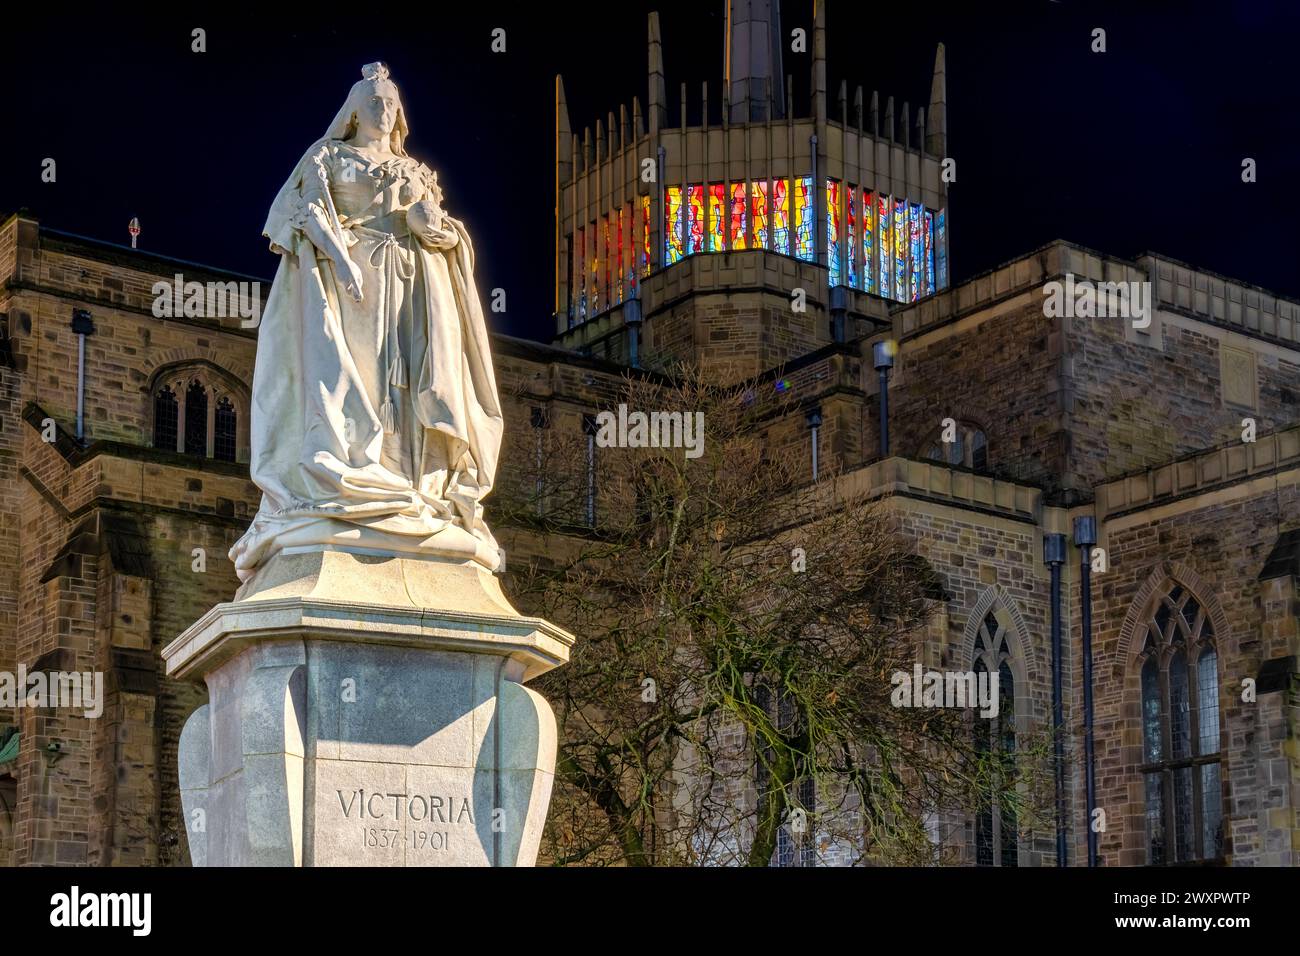 Blackburn Cathedral with Queen Victoria Statue at Sunset.  The statue is a Grade II listed monument located at Blackburn, Lancashire, UK. Stock Photo